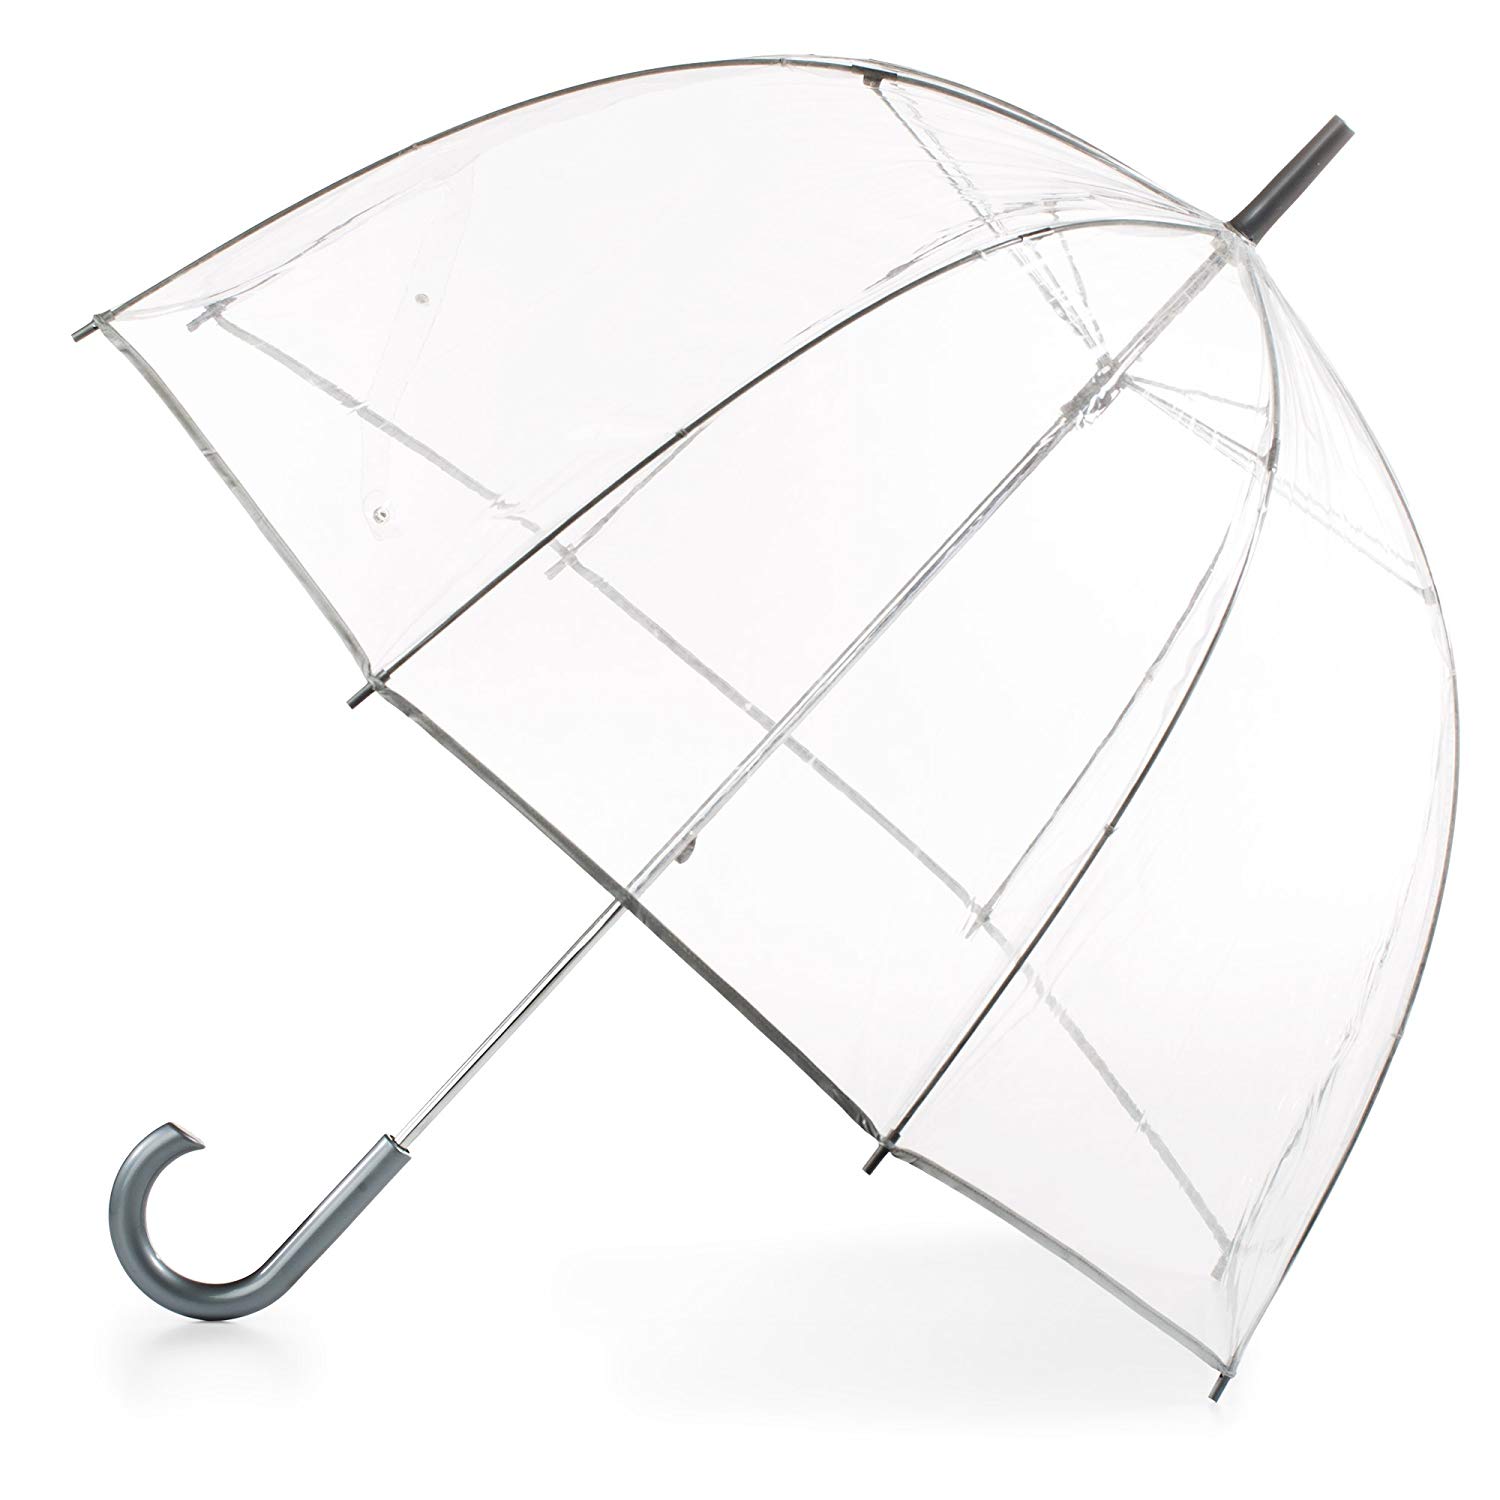 product shot of Totes Women's Clear Wedding Umbrella for rain